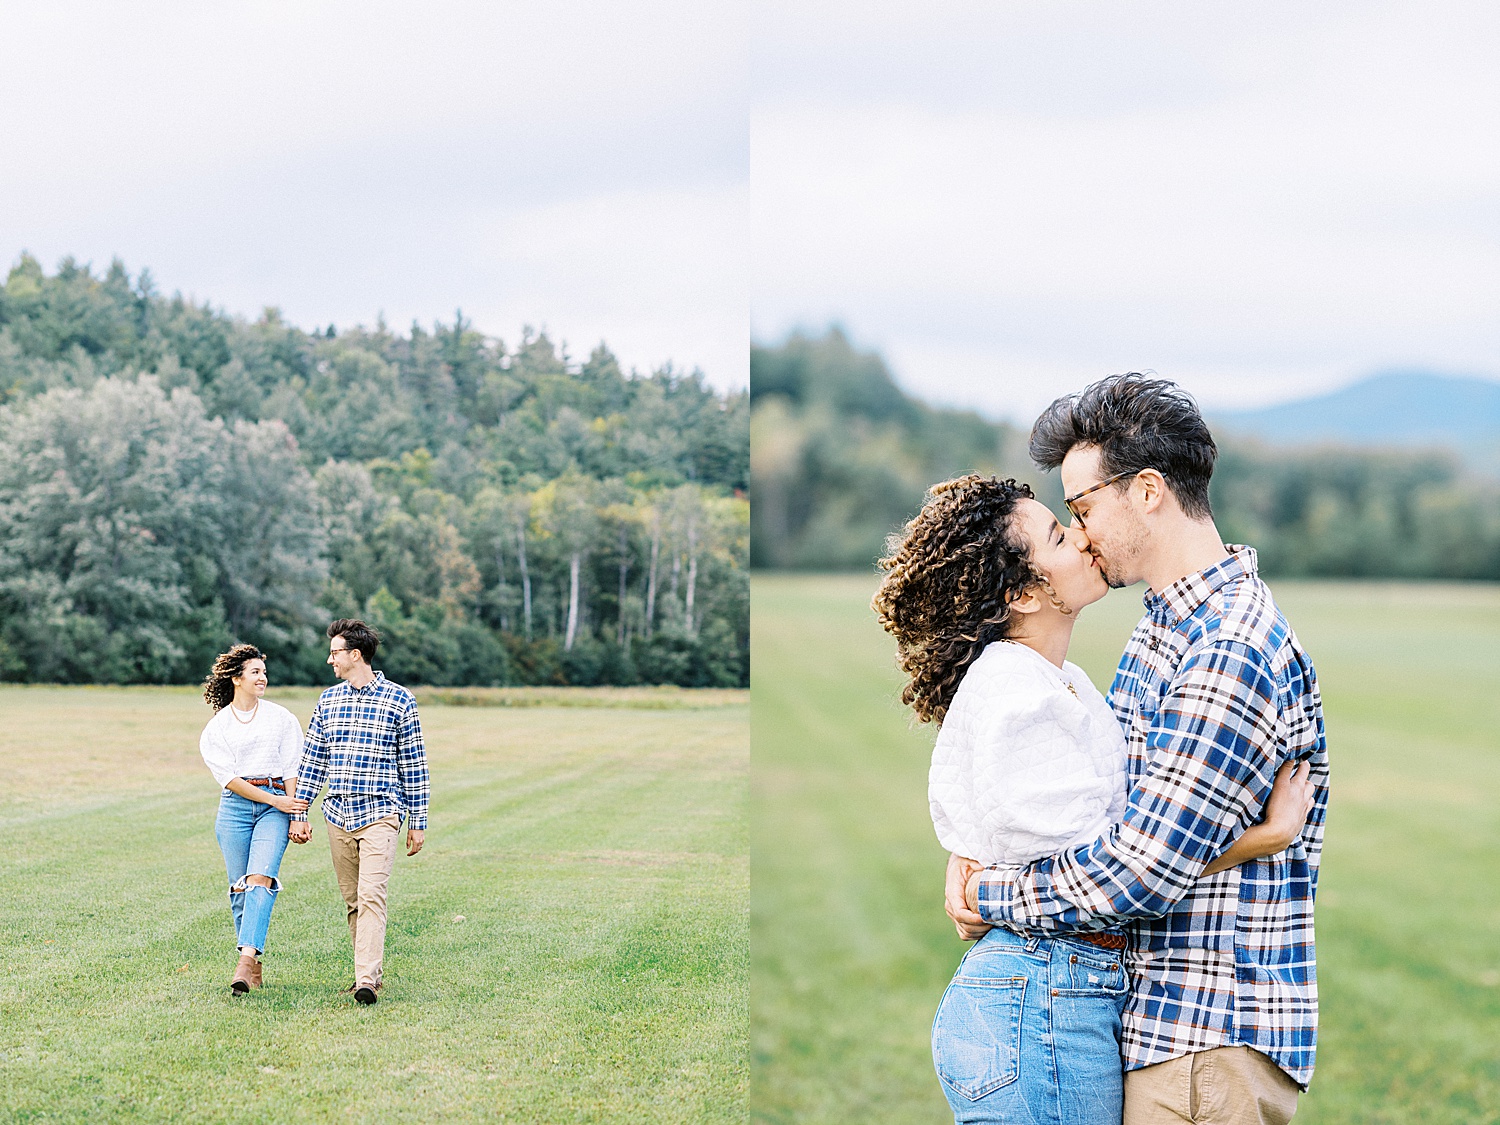 Man and woman walking across a field with thick trees in the background for their anniversary session. 